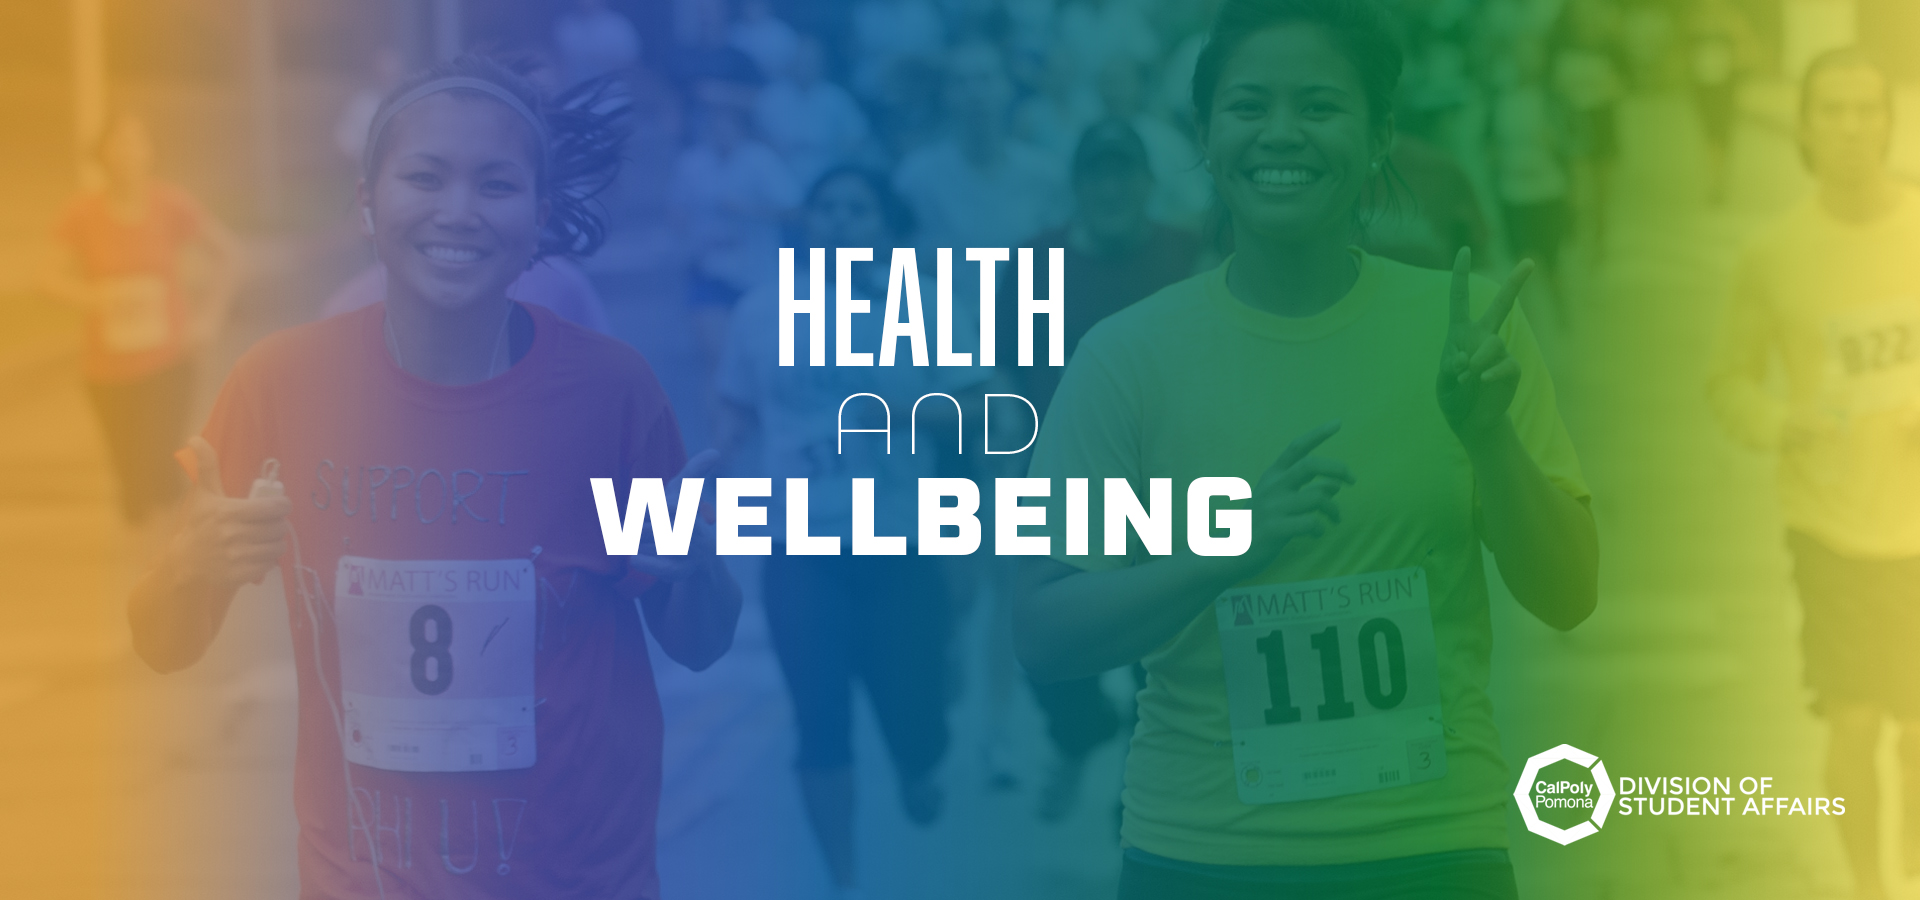 Health and Wellbeing banner with students running 